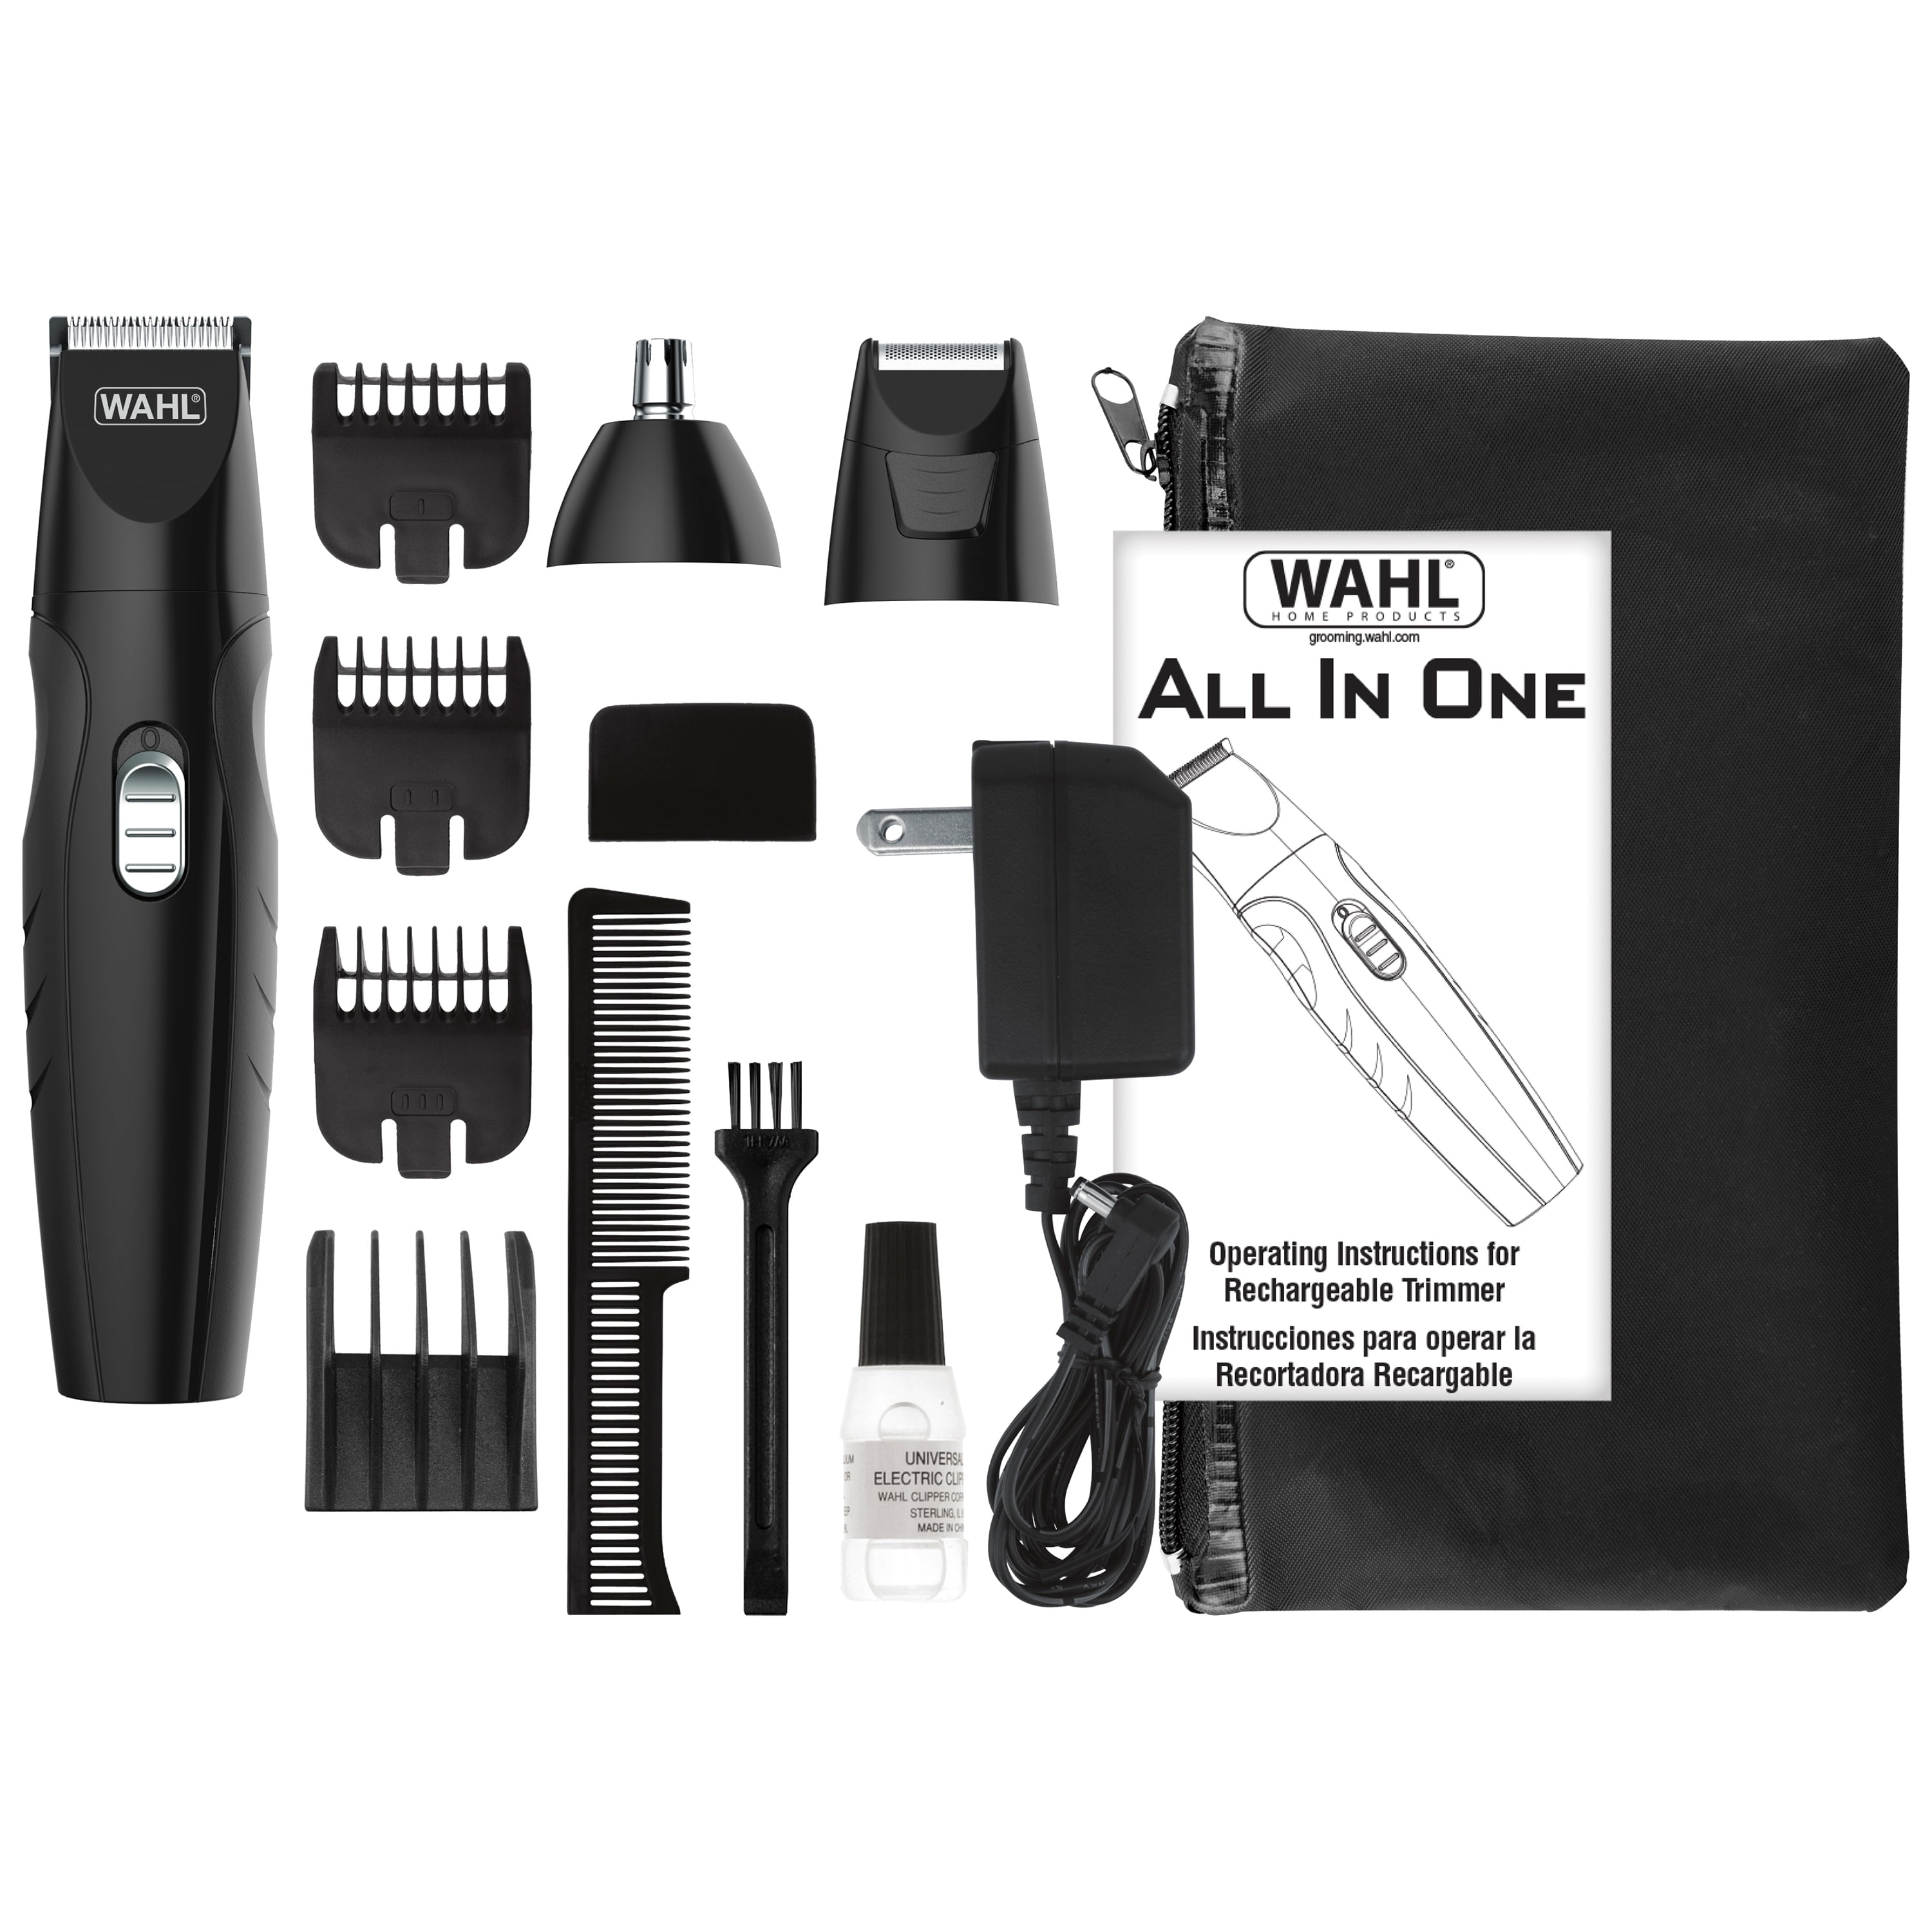 6502835 All-in-one Beard Grooming System, Black